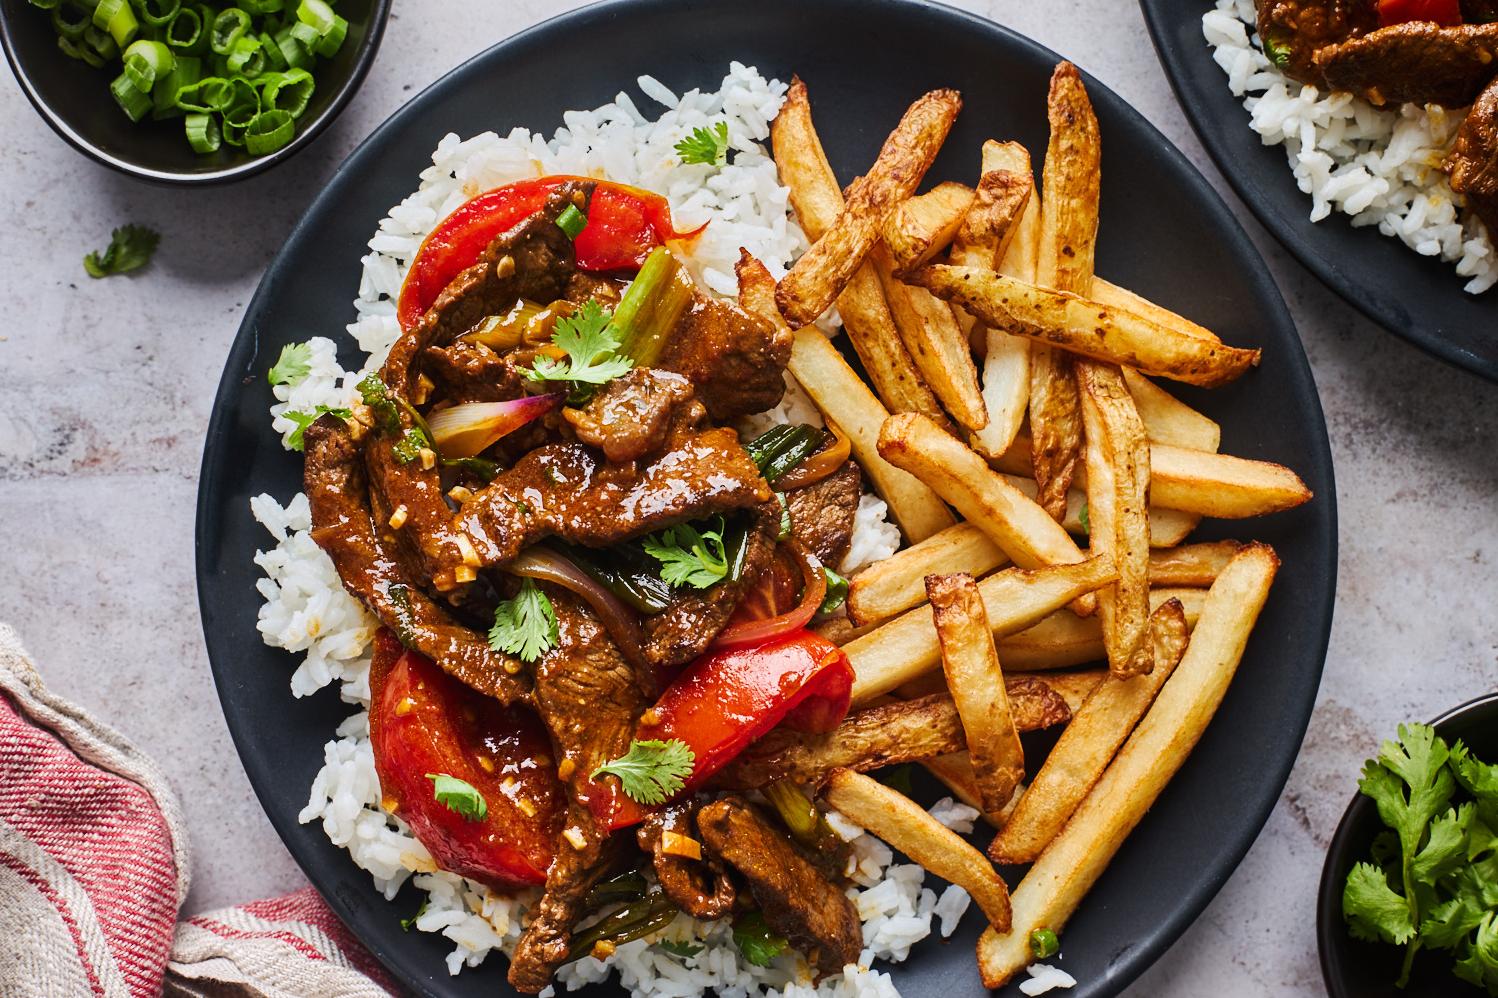  This Lomo Saltado is the ultimate comfort food with a spicy twist.